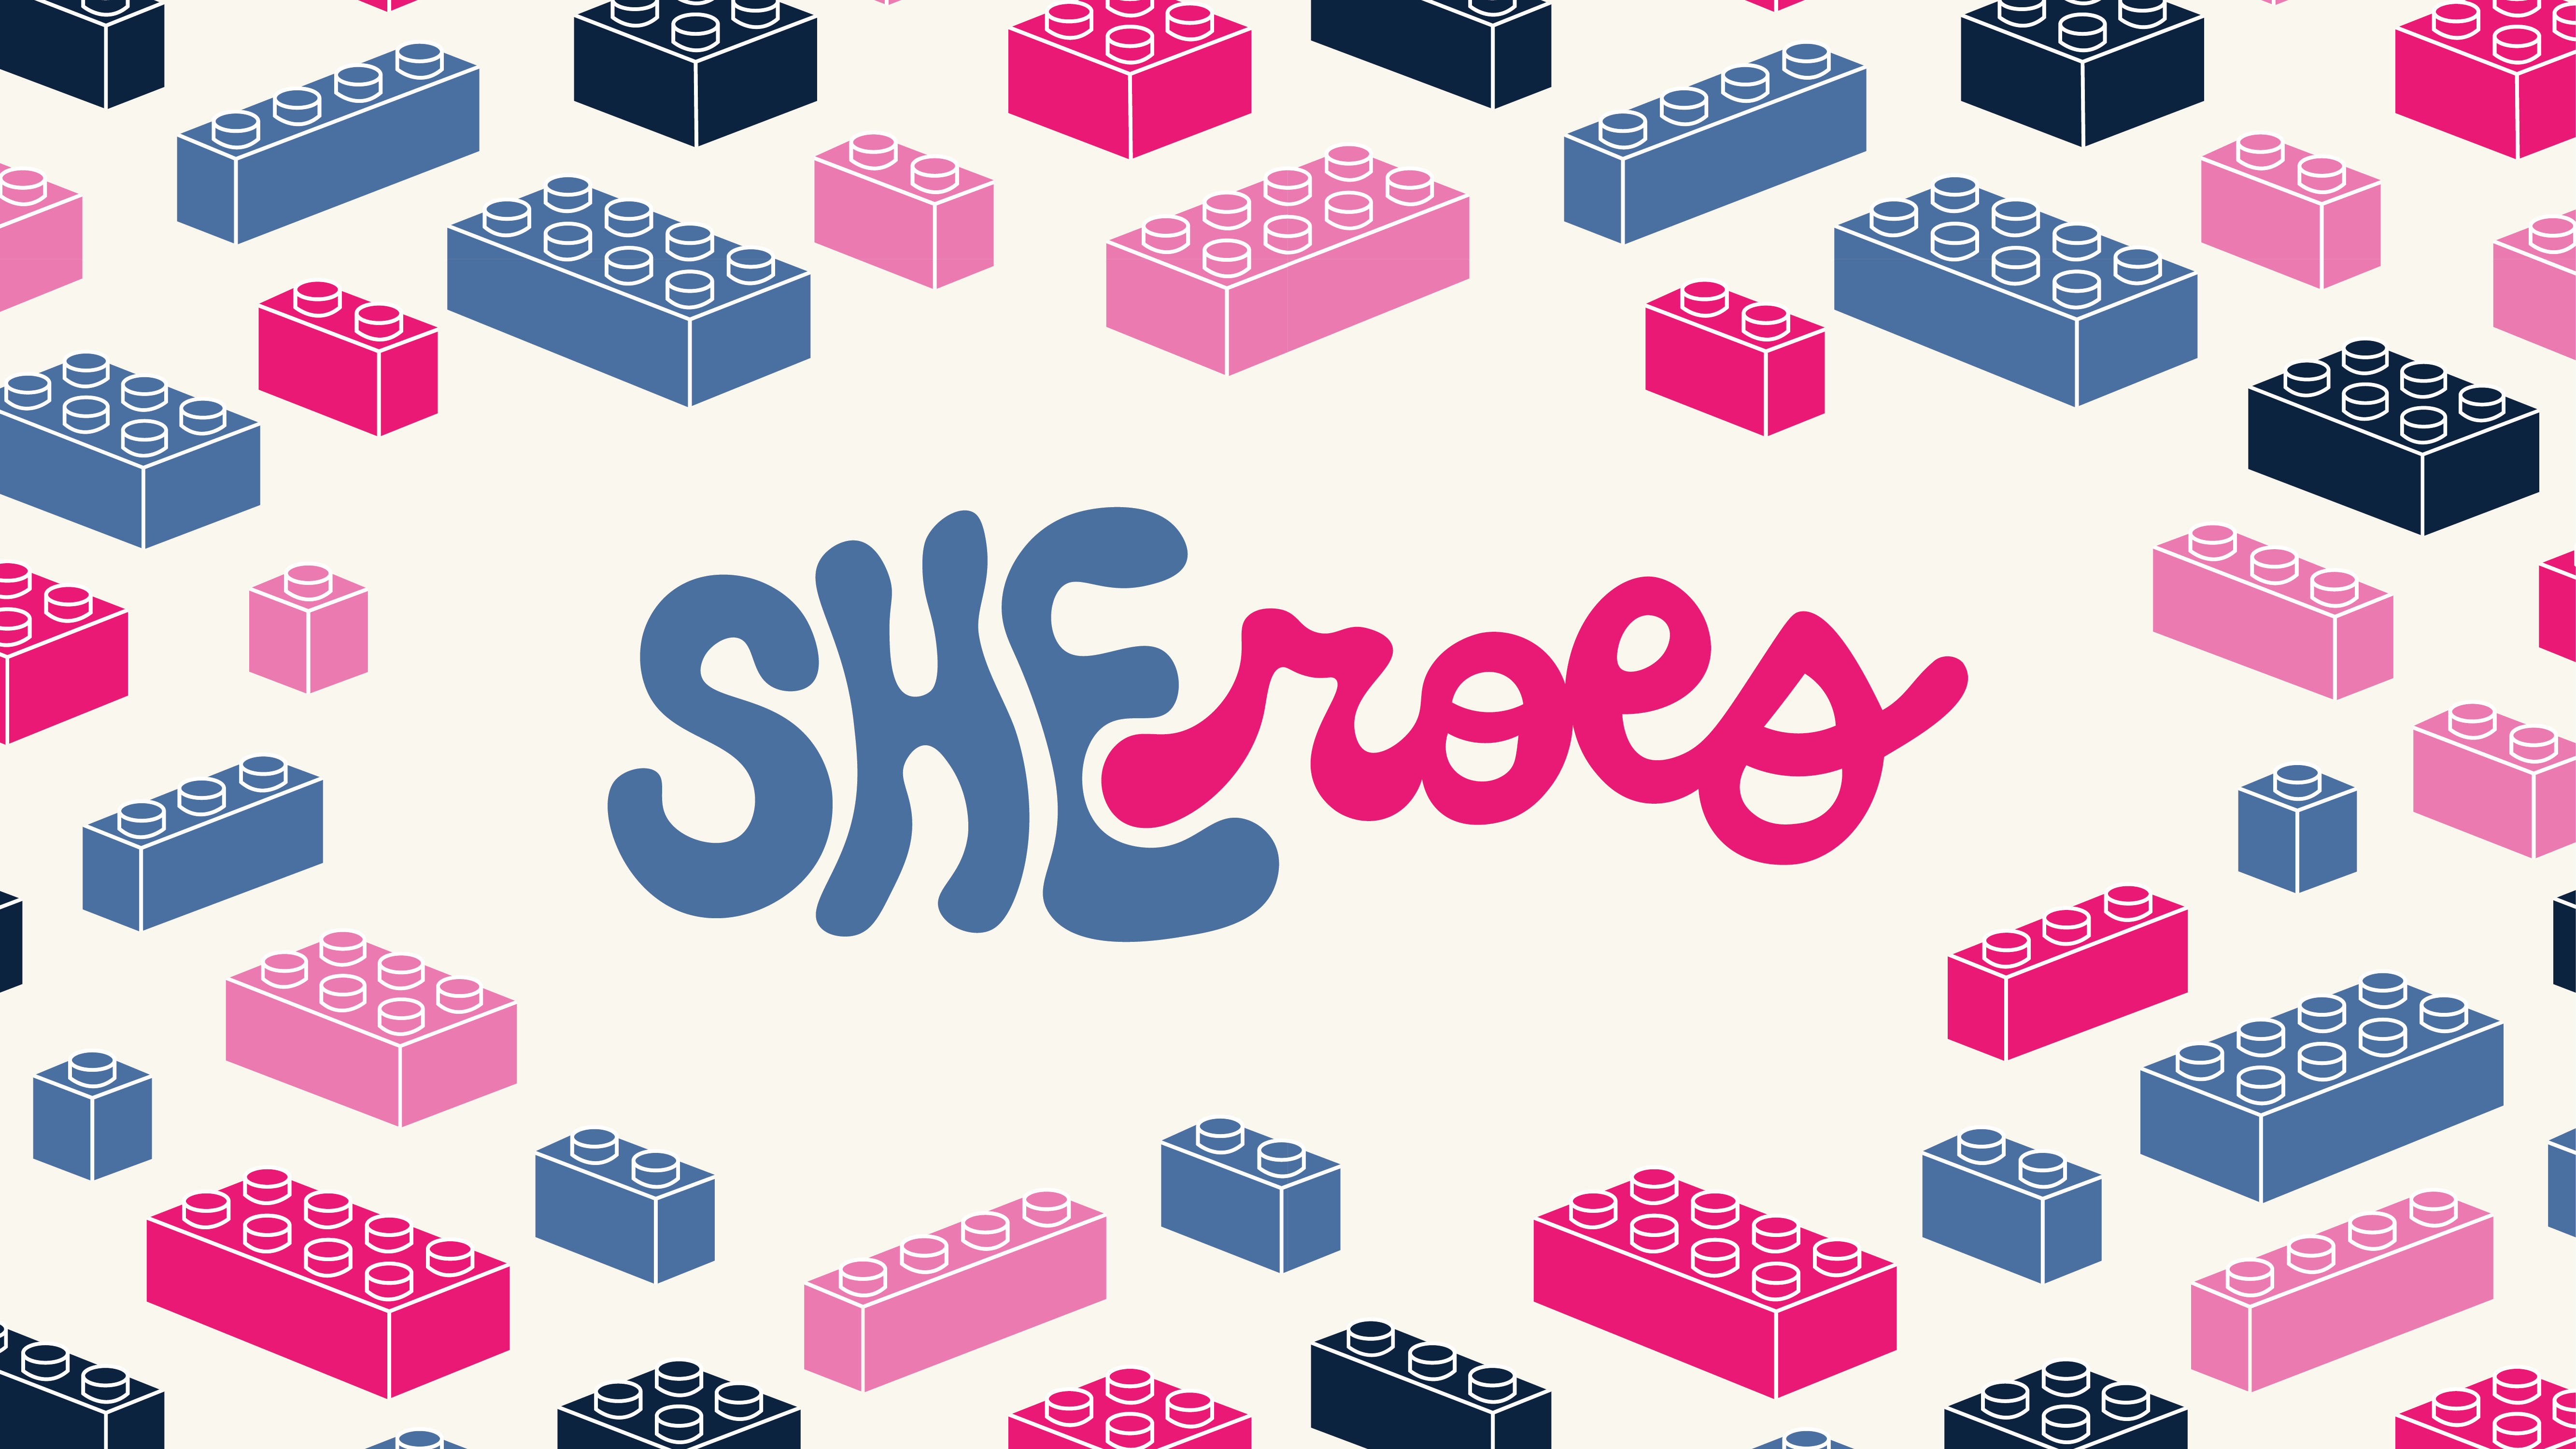 SHEroes will take place Friday, Nov. 18.